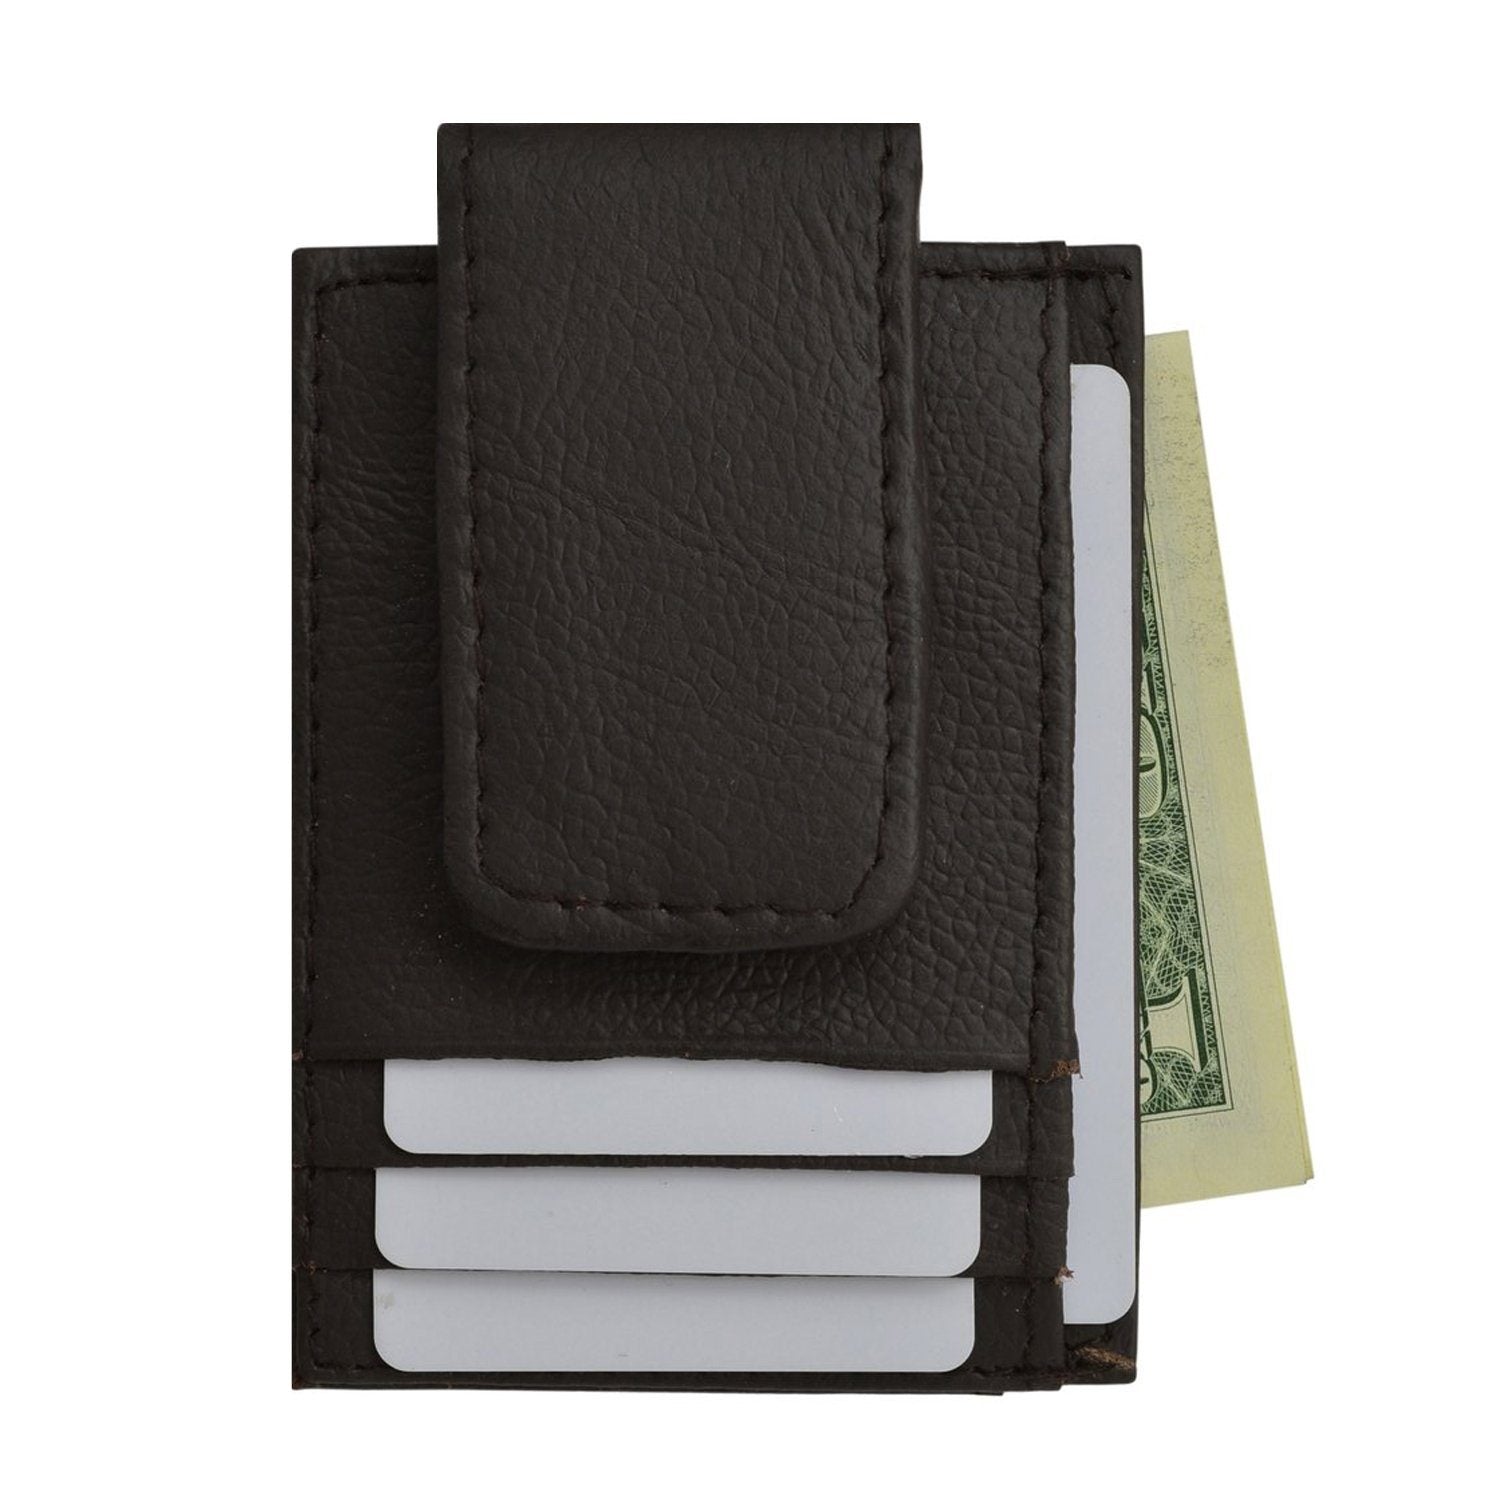 AFONiE Genuine Leather Magnetic Money Clip